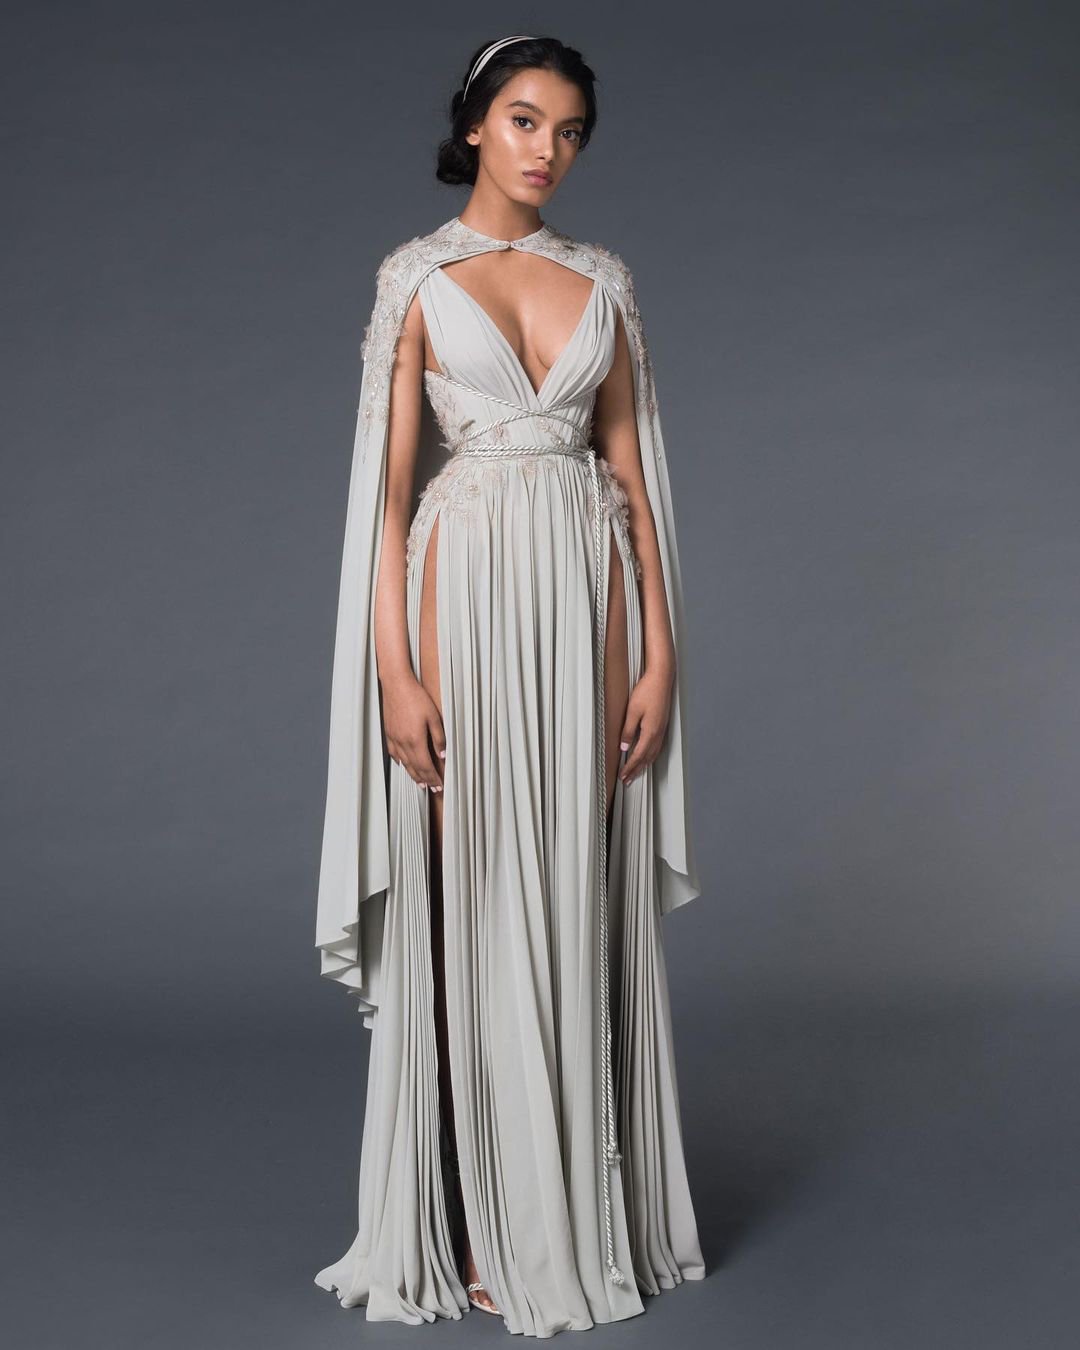 Greek Wedding Dresses For Glamorous Bride That Are Wow